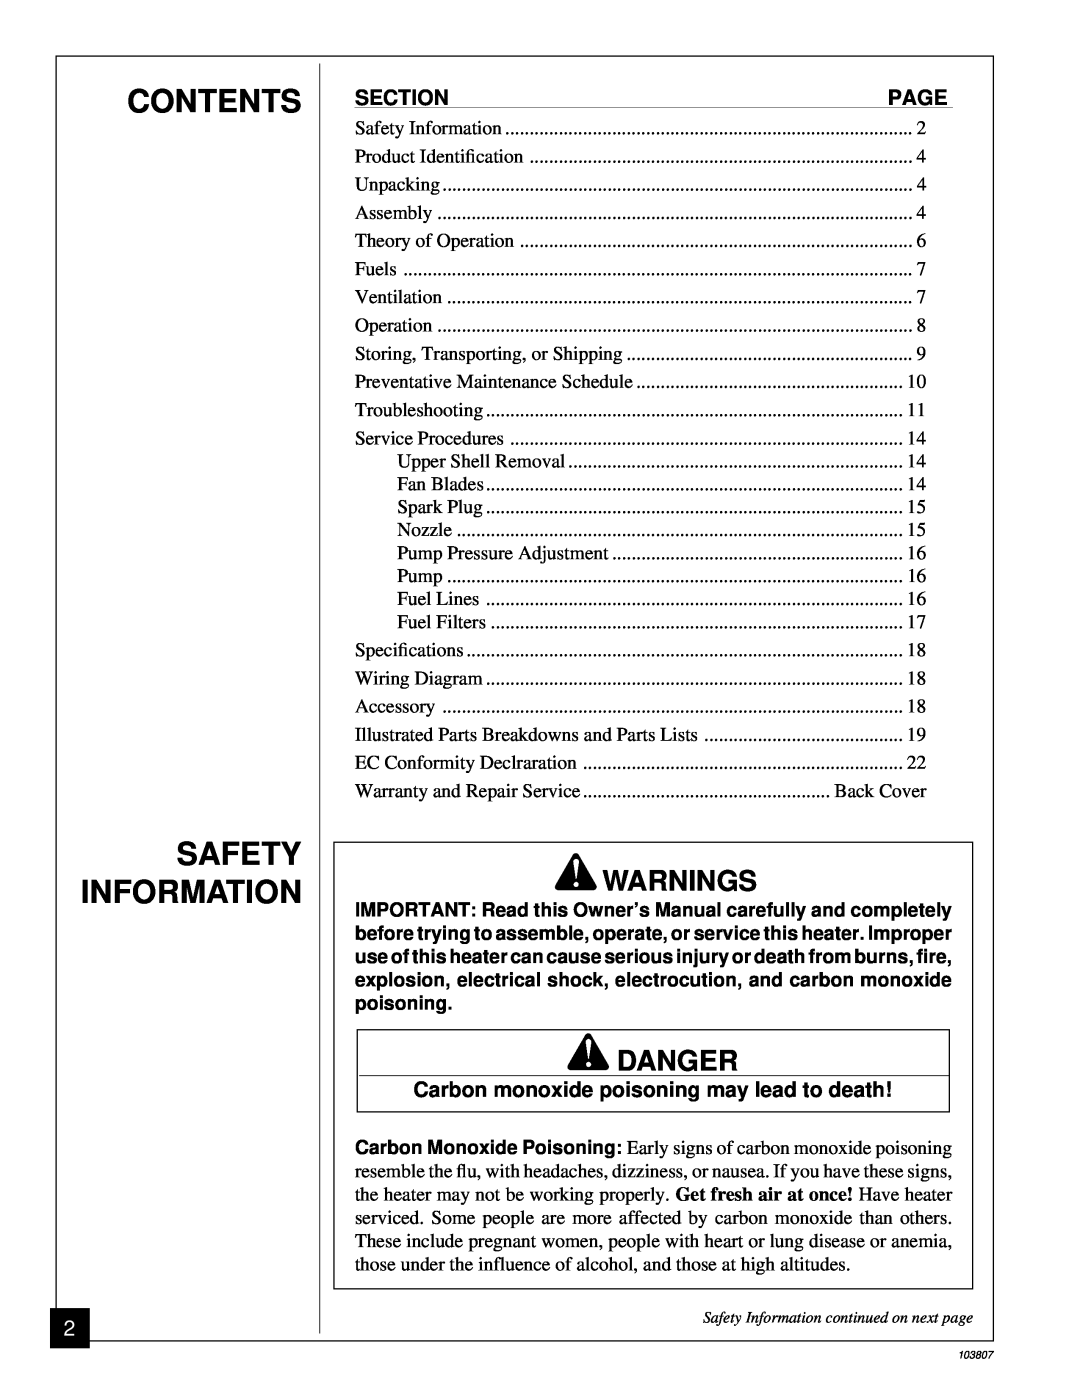 Desa B350CEA Contents Safety Information, Warnings, Danger, Section, Page, Carbon monoxide poisoning may lead to death 